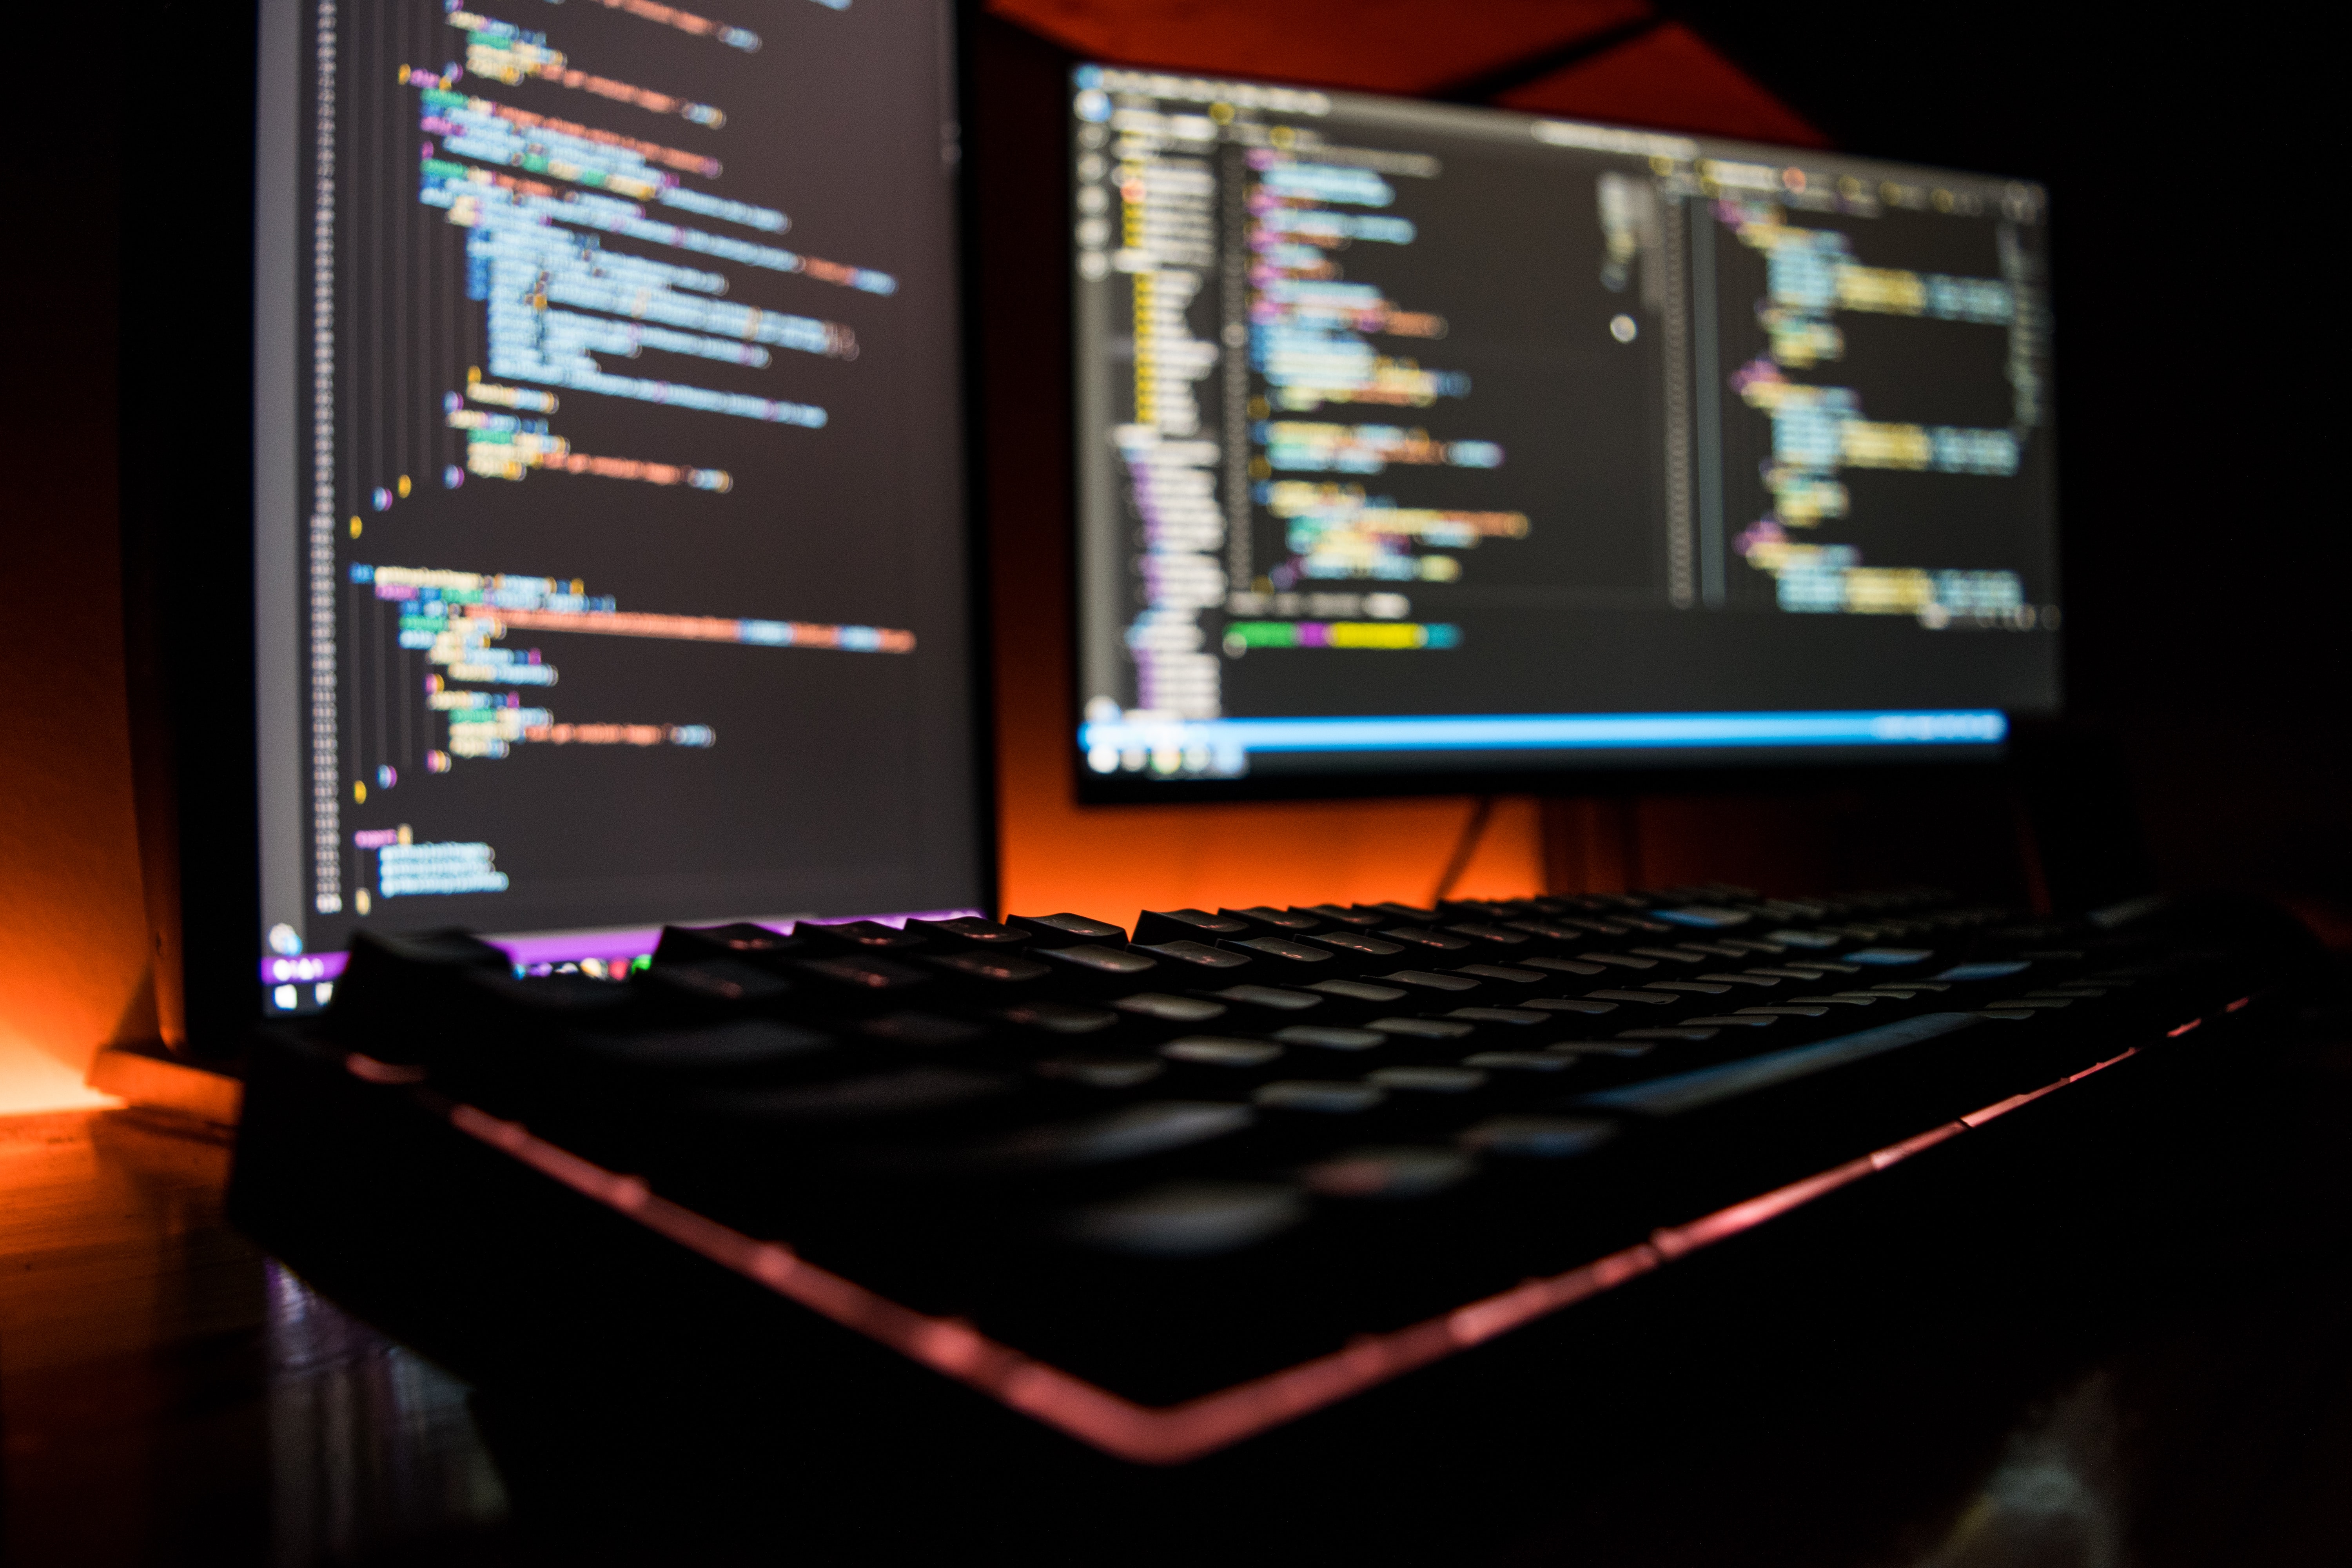 Competitive programming on computer screens